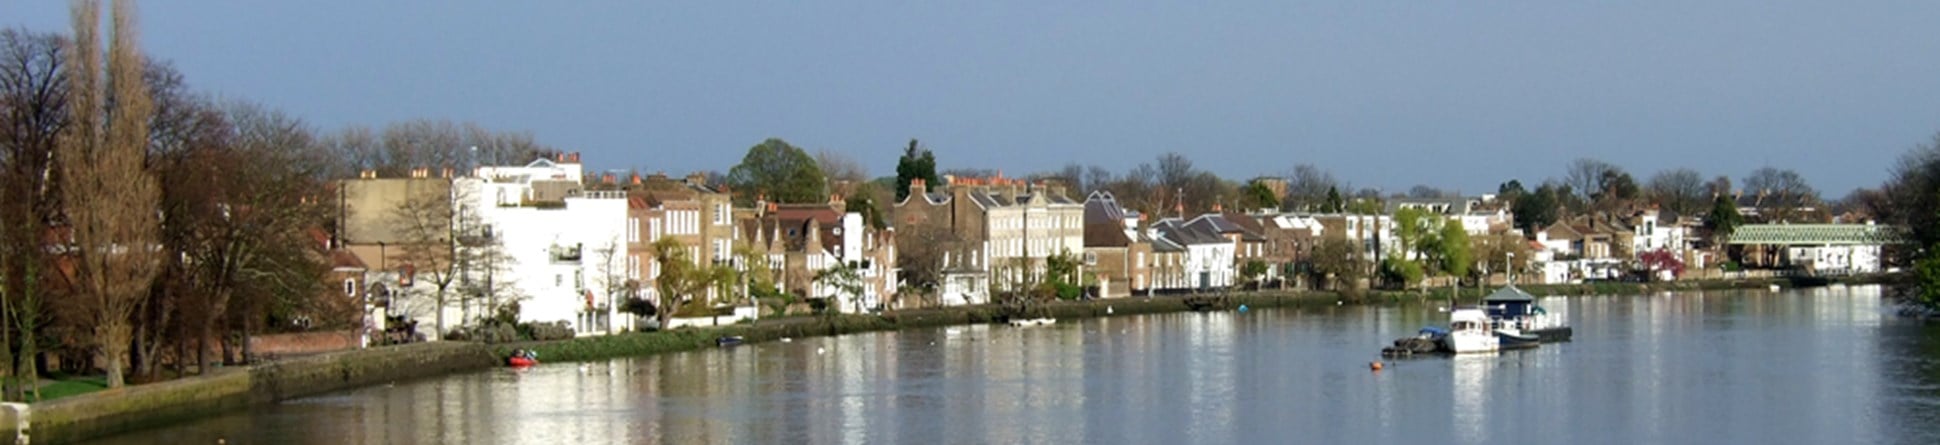 Image of Strand on the Green Conservation Area in Hounslow, London